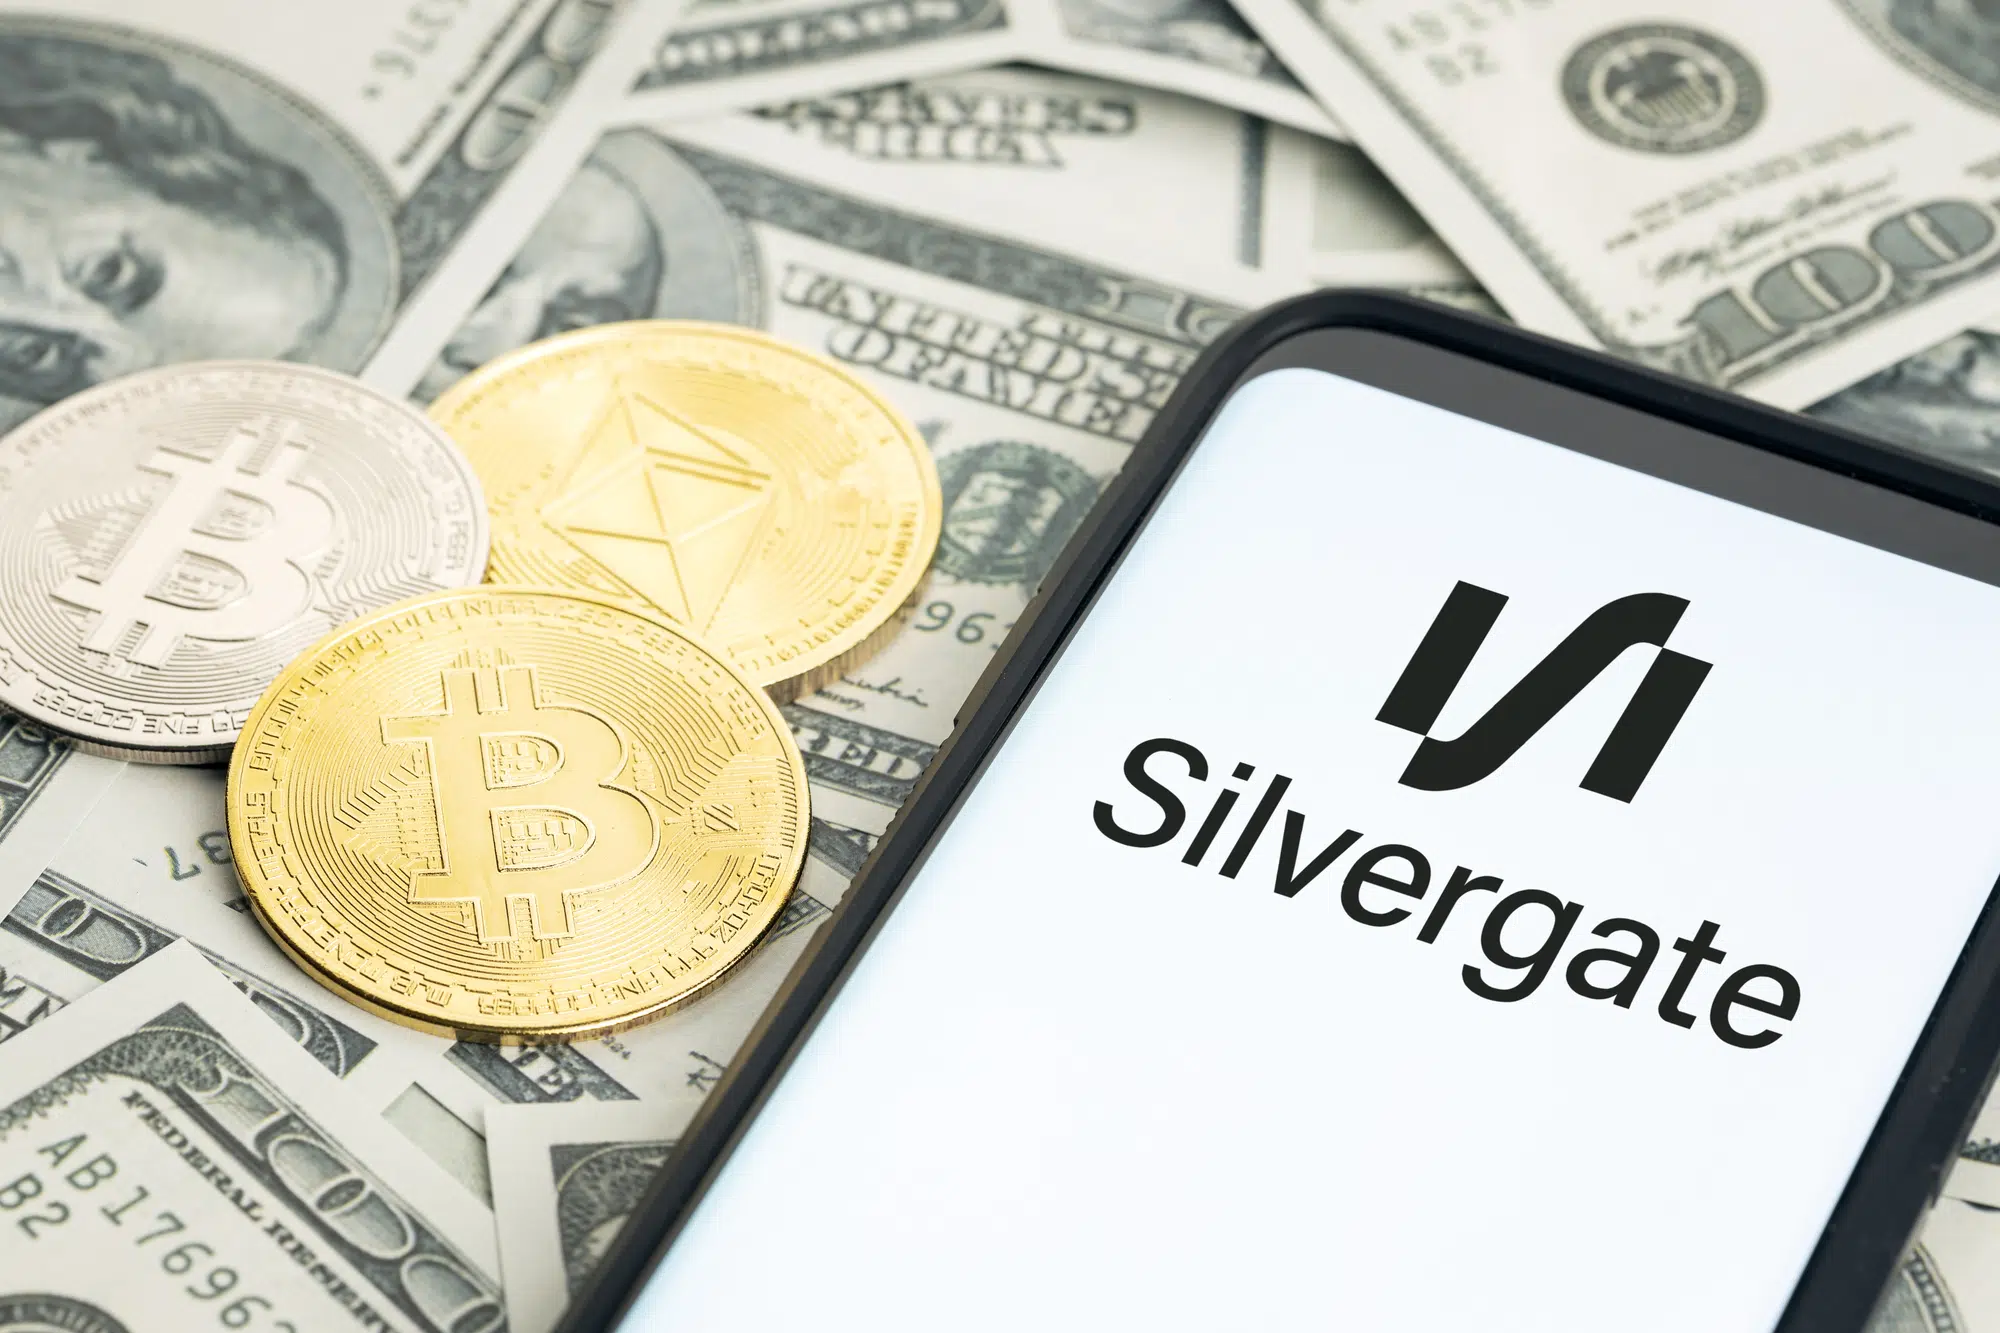 Galicia, Spain; january 28, 2022: Silvergate financial services company logo on Smartphone screen, dollar banknotes and crypto coins on table